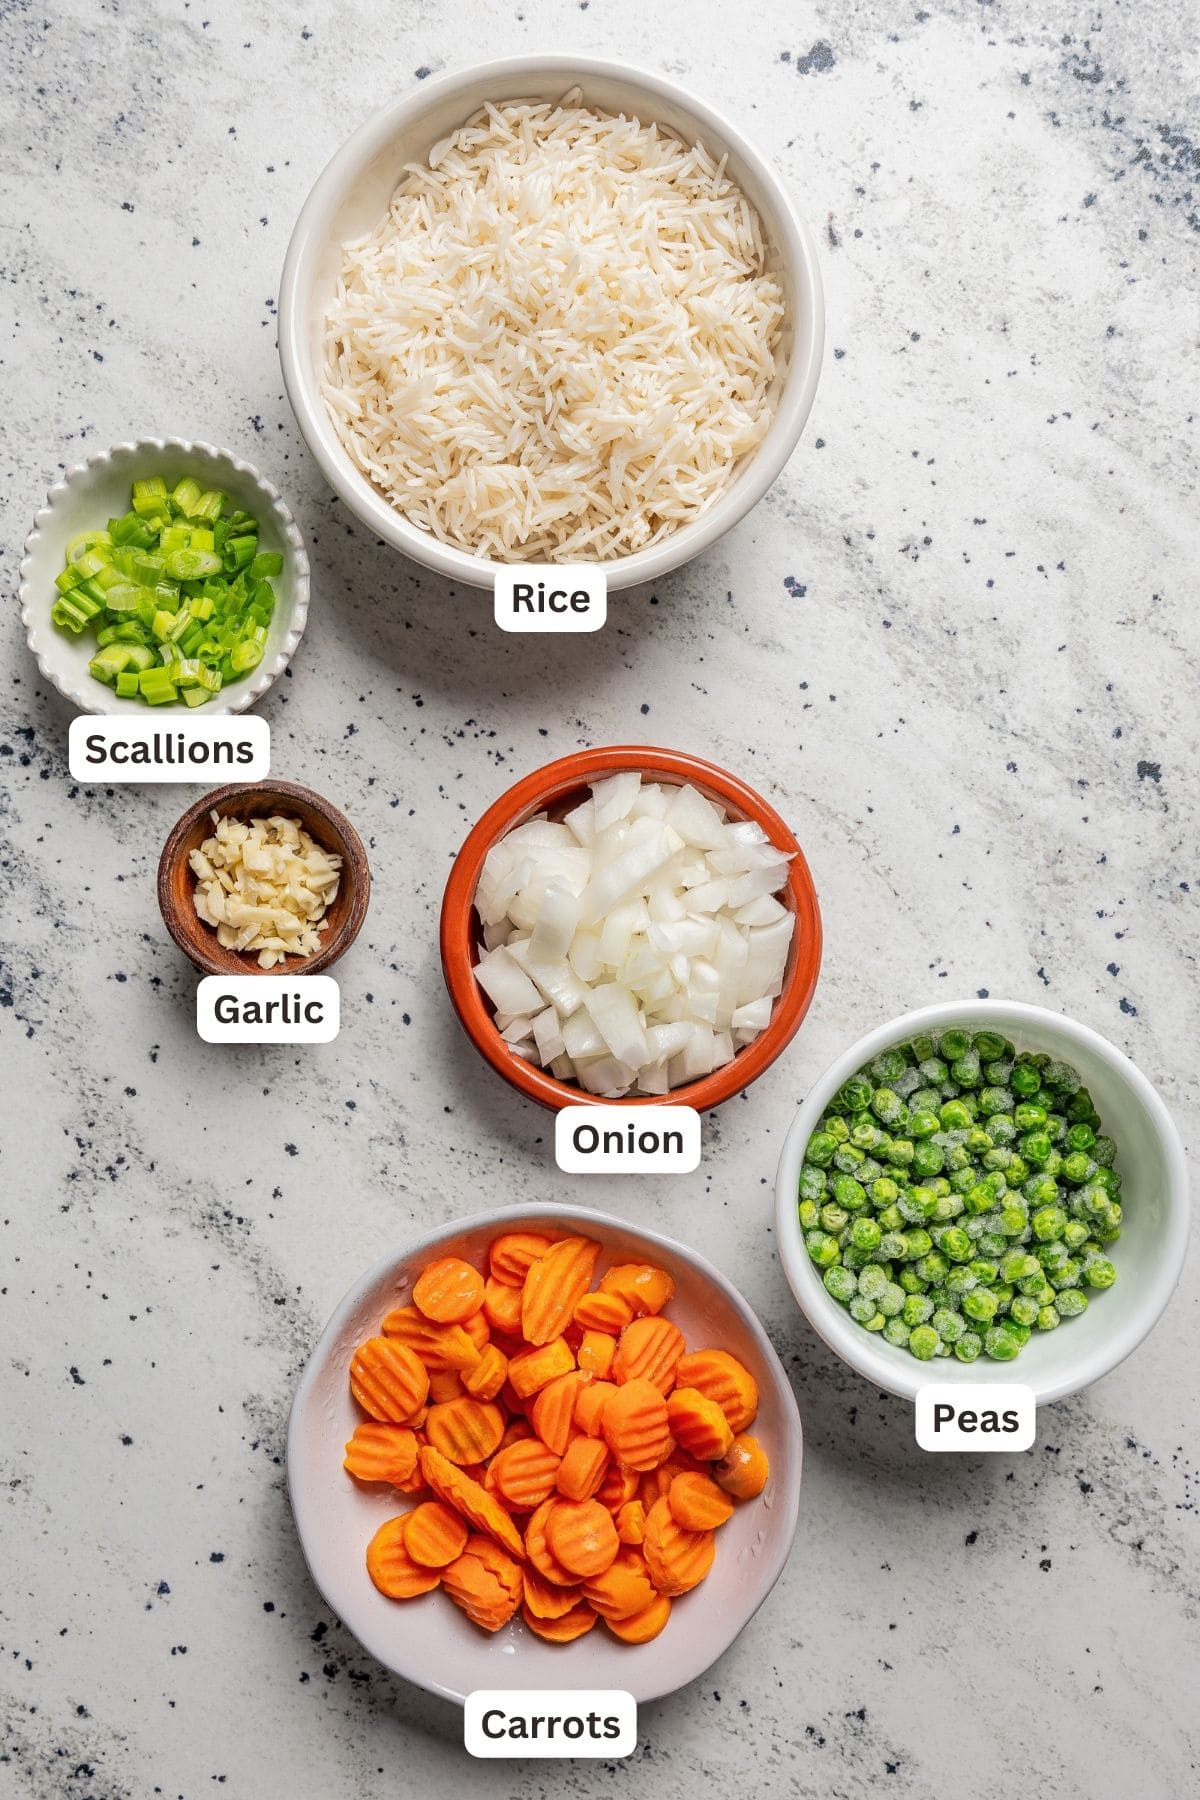 Fried rice ingredients with text labels overlaying each ingredient.